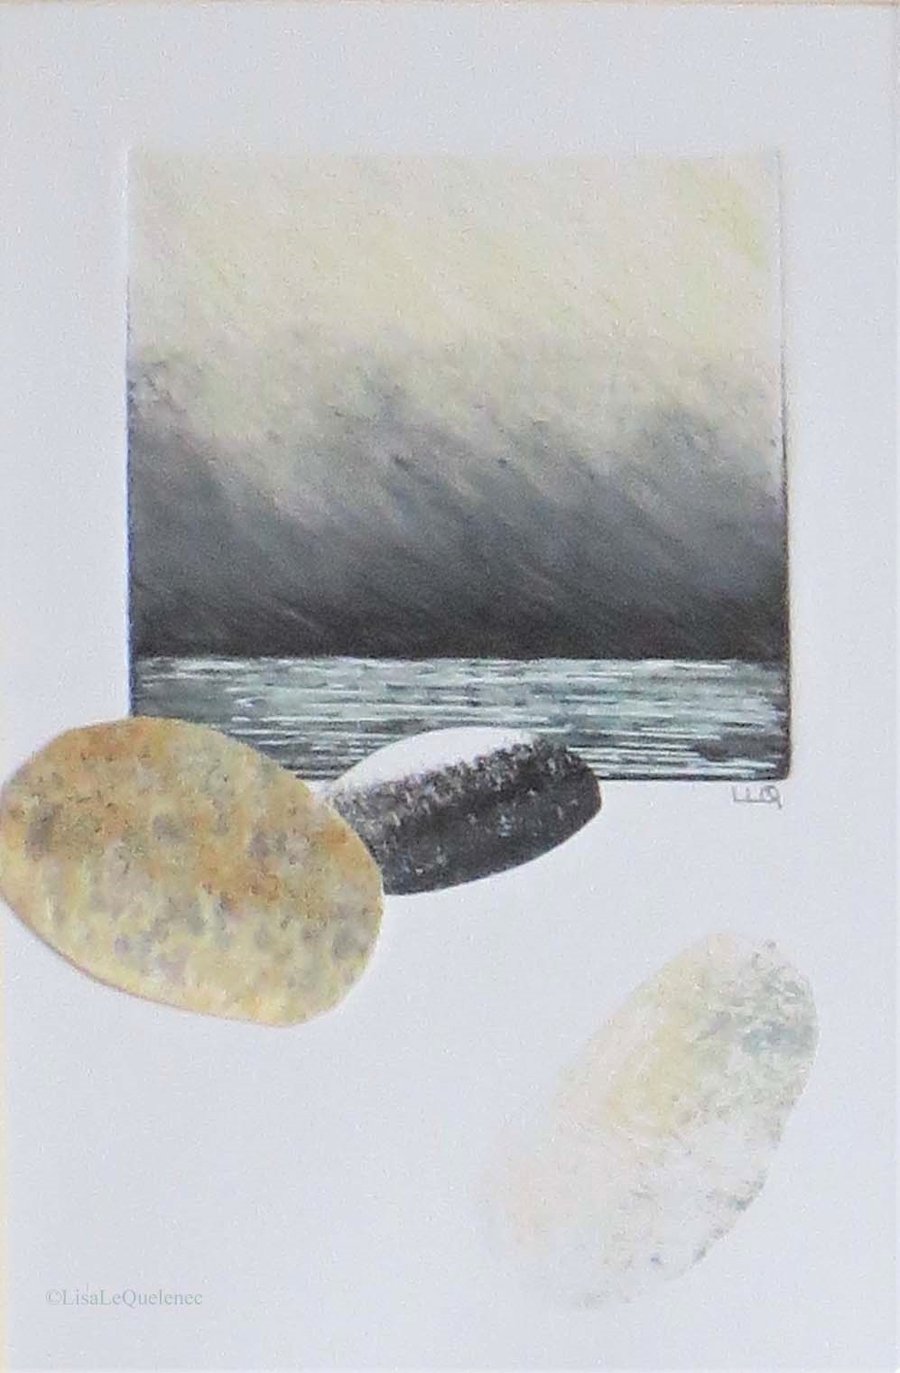 Ocean storm and sky with pebbles an original mixed media and collage picture